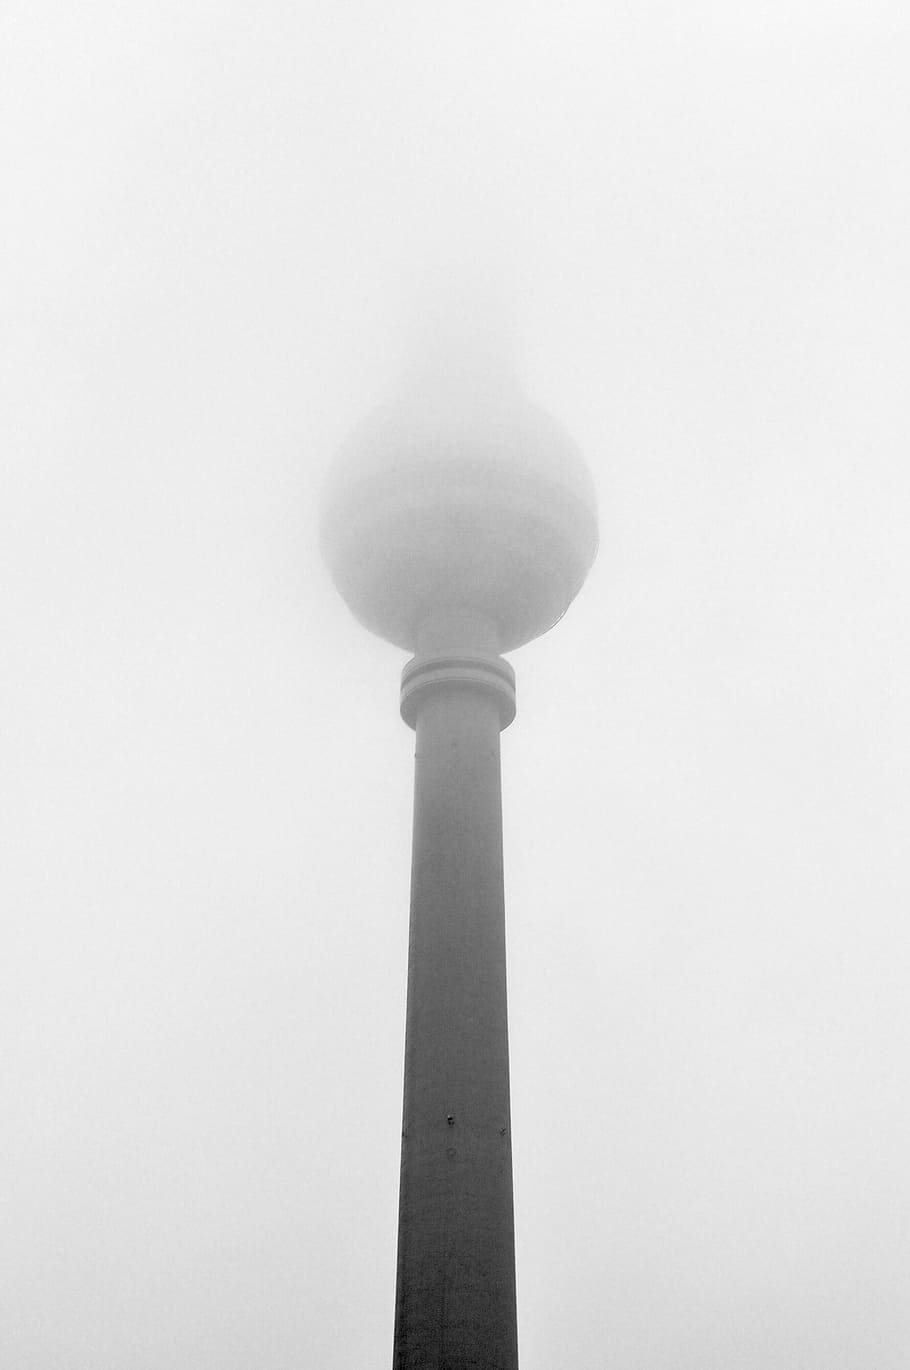 white tower, architecture, building, infrastructure, tower, landmark, skyscraper, fog, outdoors, day